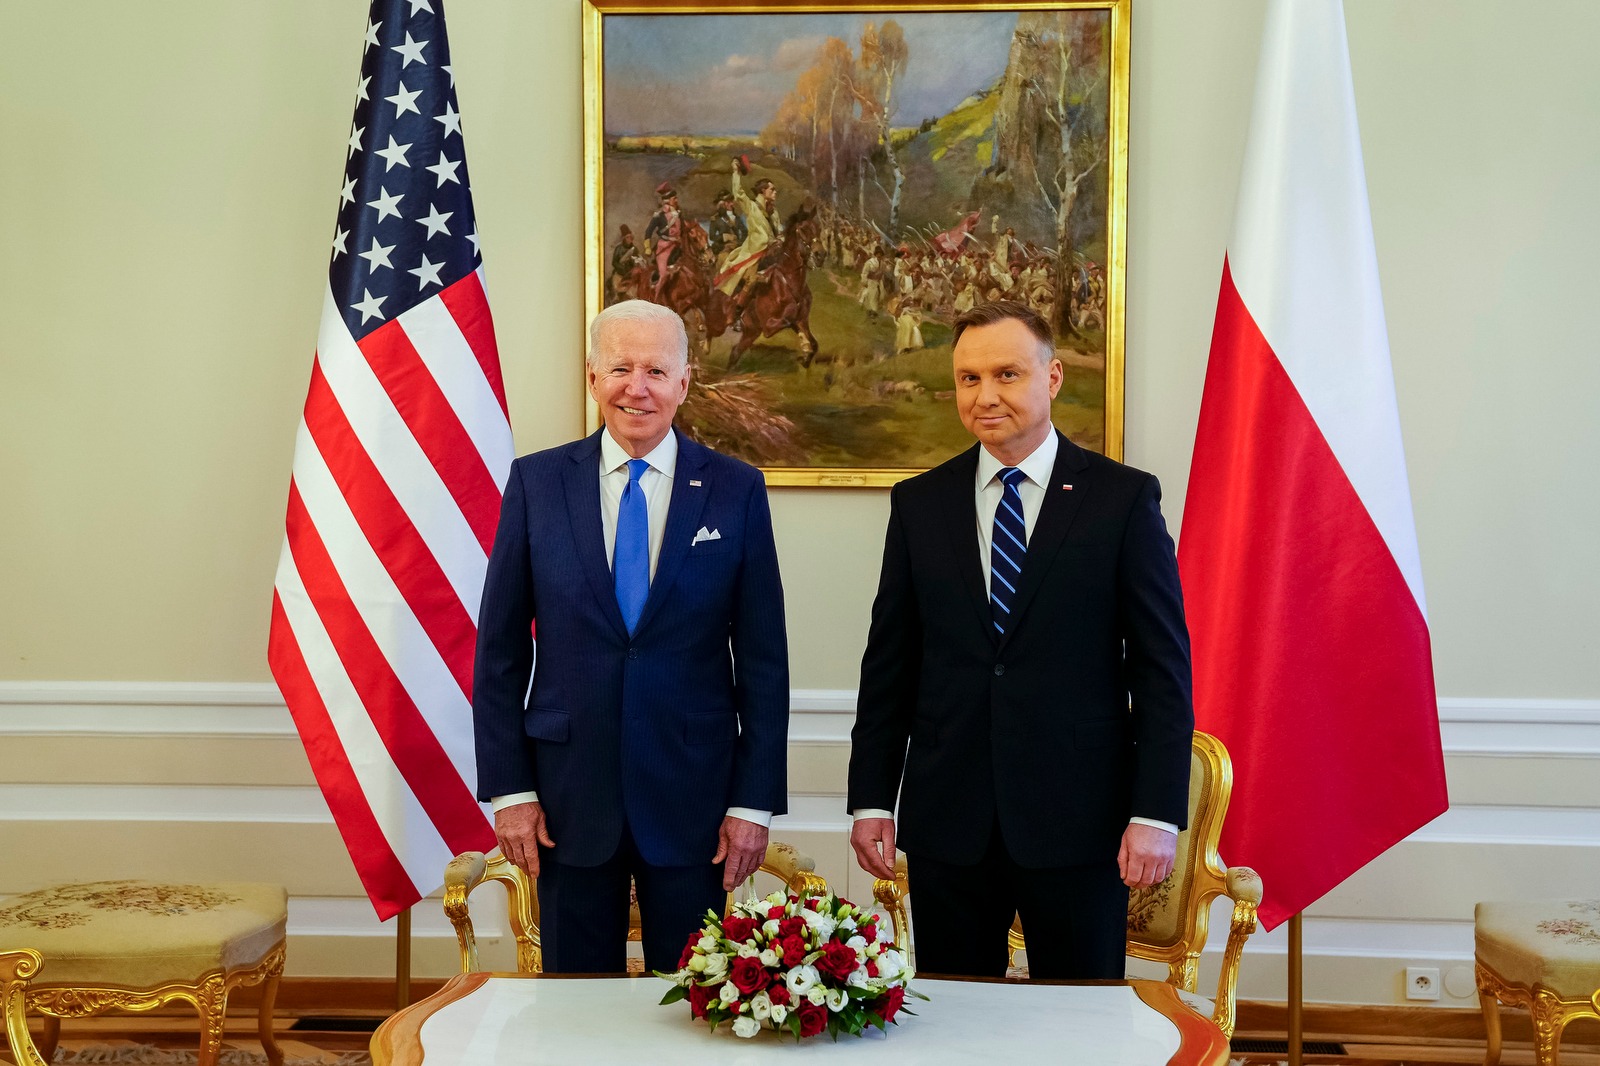 Photo: Today, I met with Polish President Andrzej Duda in Warsaw. I thanked him and the people of Poland for opening their homes and hearts to their neighbors in need. And we discussed our shared commitment to support the people and government of Ukraine. Office of the President of the United States, Public domain, via Wikimedia Commons. Source: https://www.facebook.com/POTUS/posts/404297165030586.